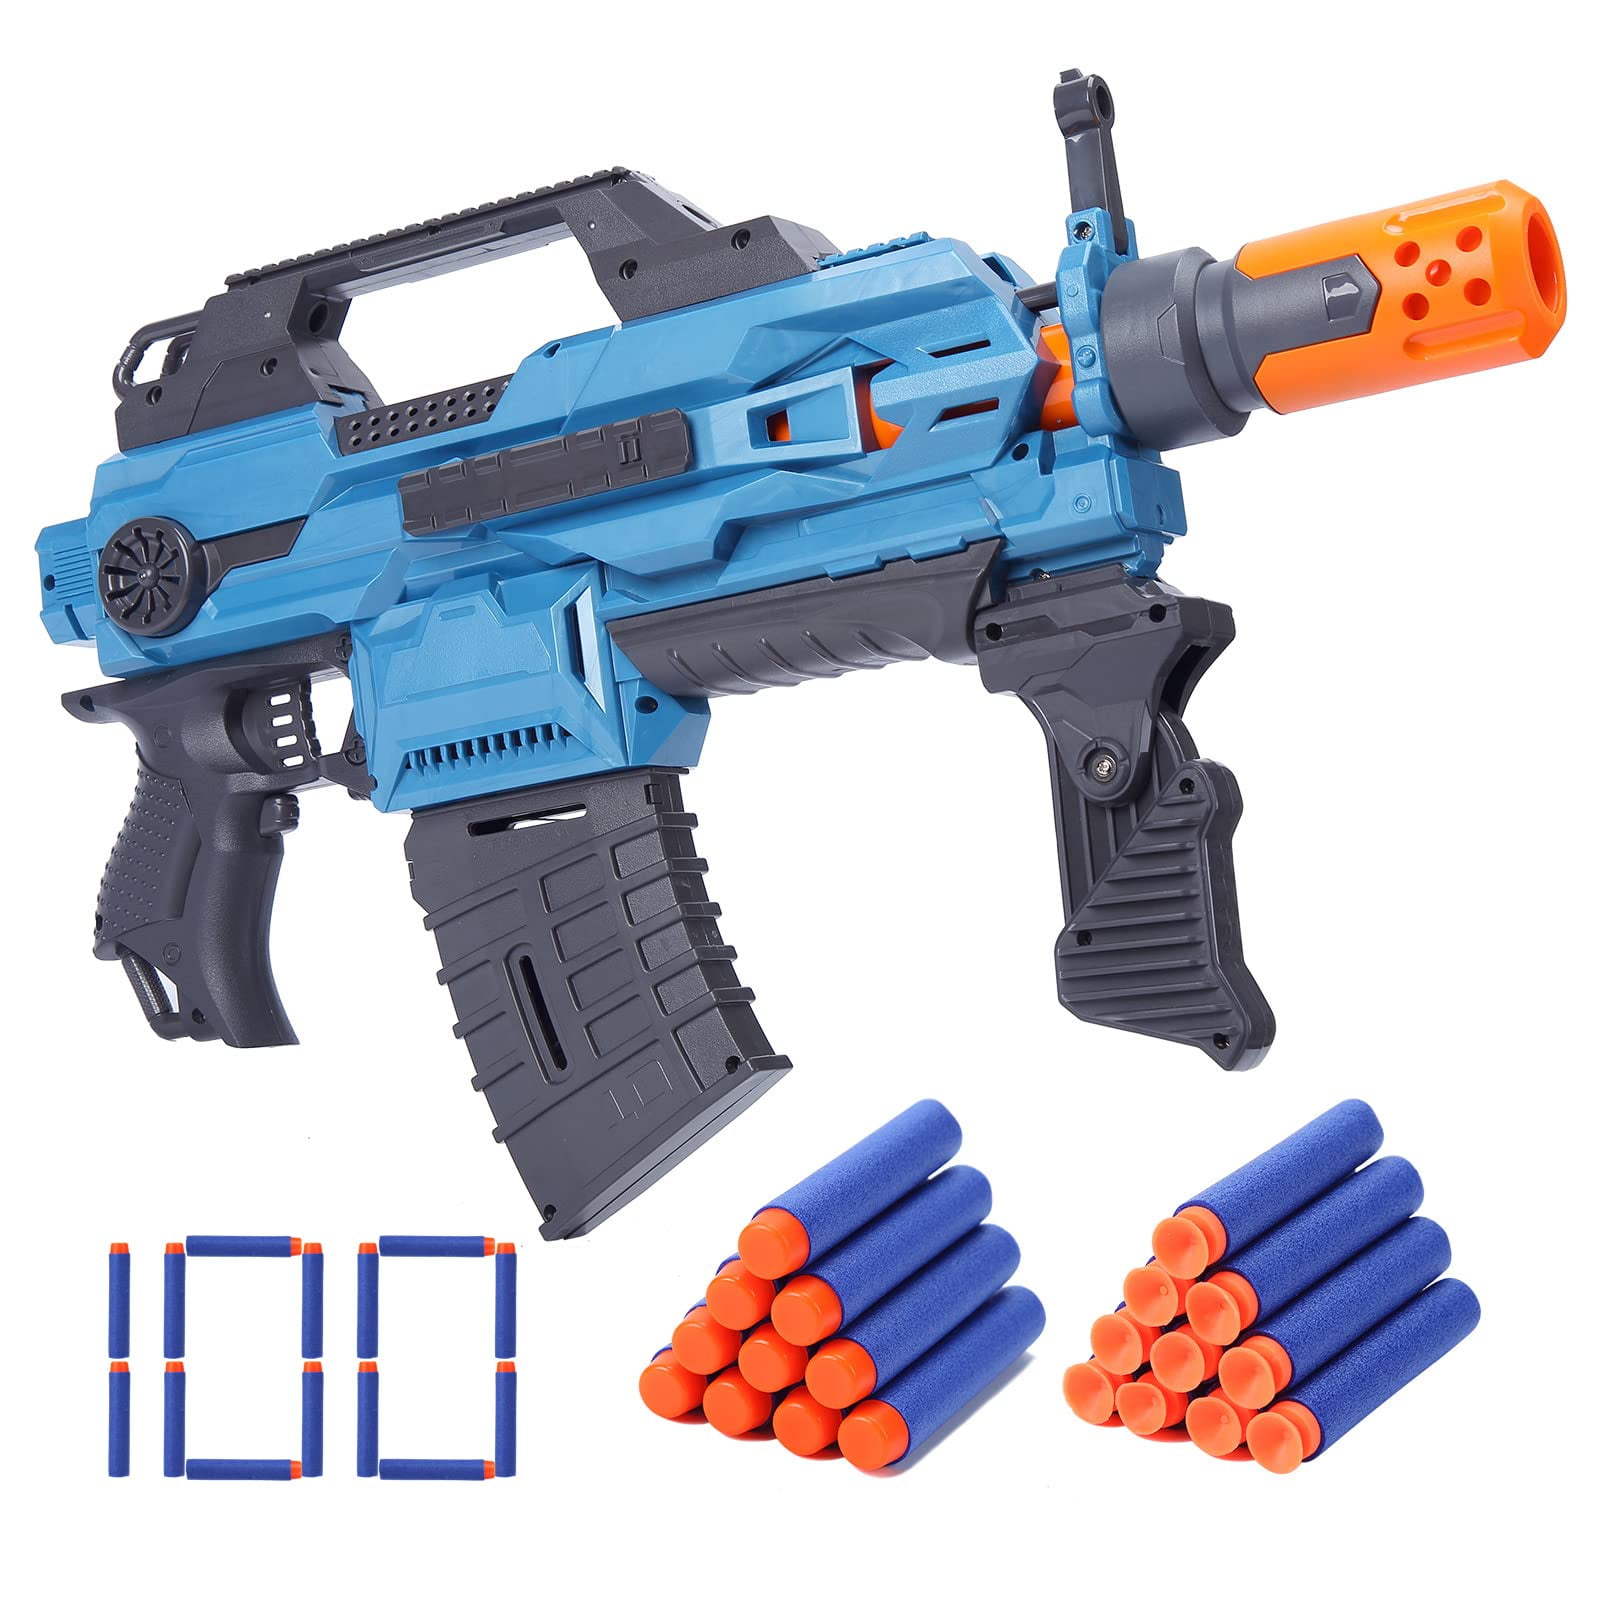 HA-EMORE Electric Automatic Toy Guns,Toys Foam Blasters with 100 Foam  Darts,DIY Customized Machine Gun for Kids,Outdoor Shooting Games Toys Gift  for 6-12 Year Old Boys & Girls 